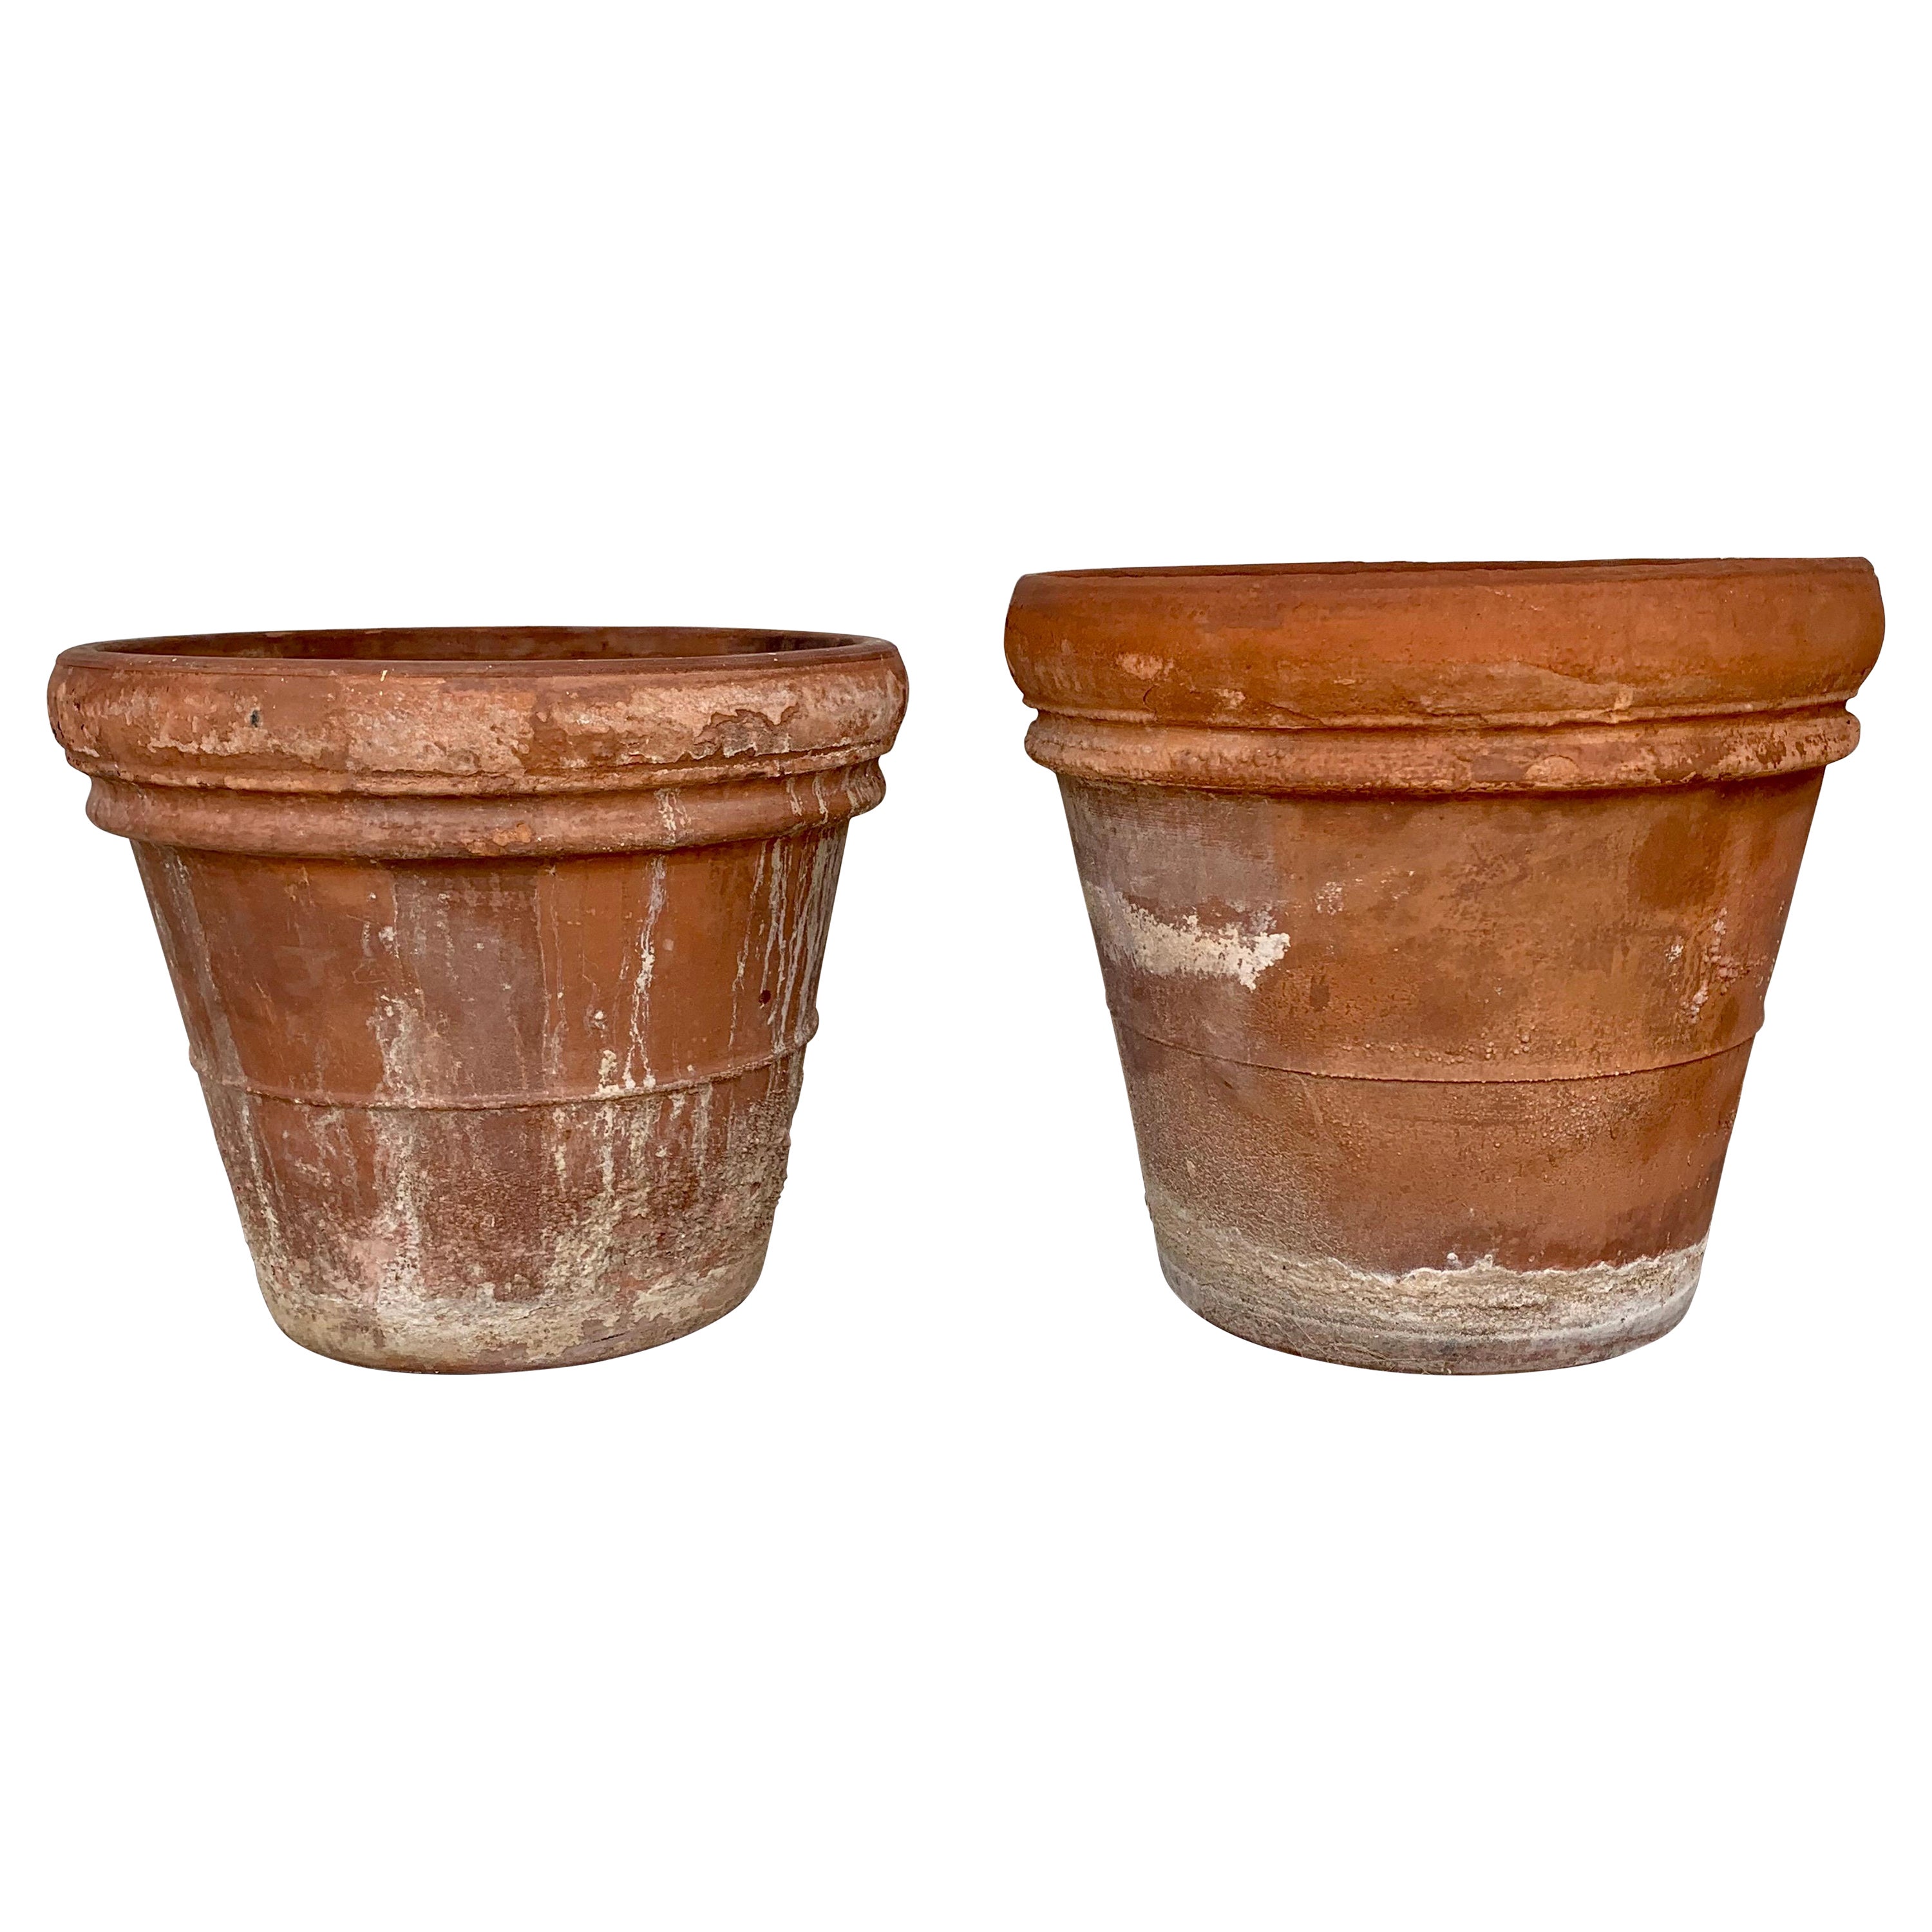 Pair of Clay Planters from Spain